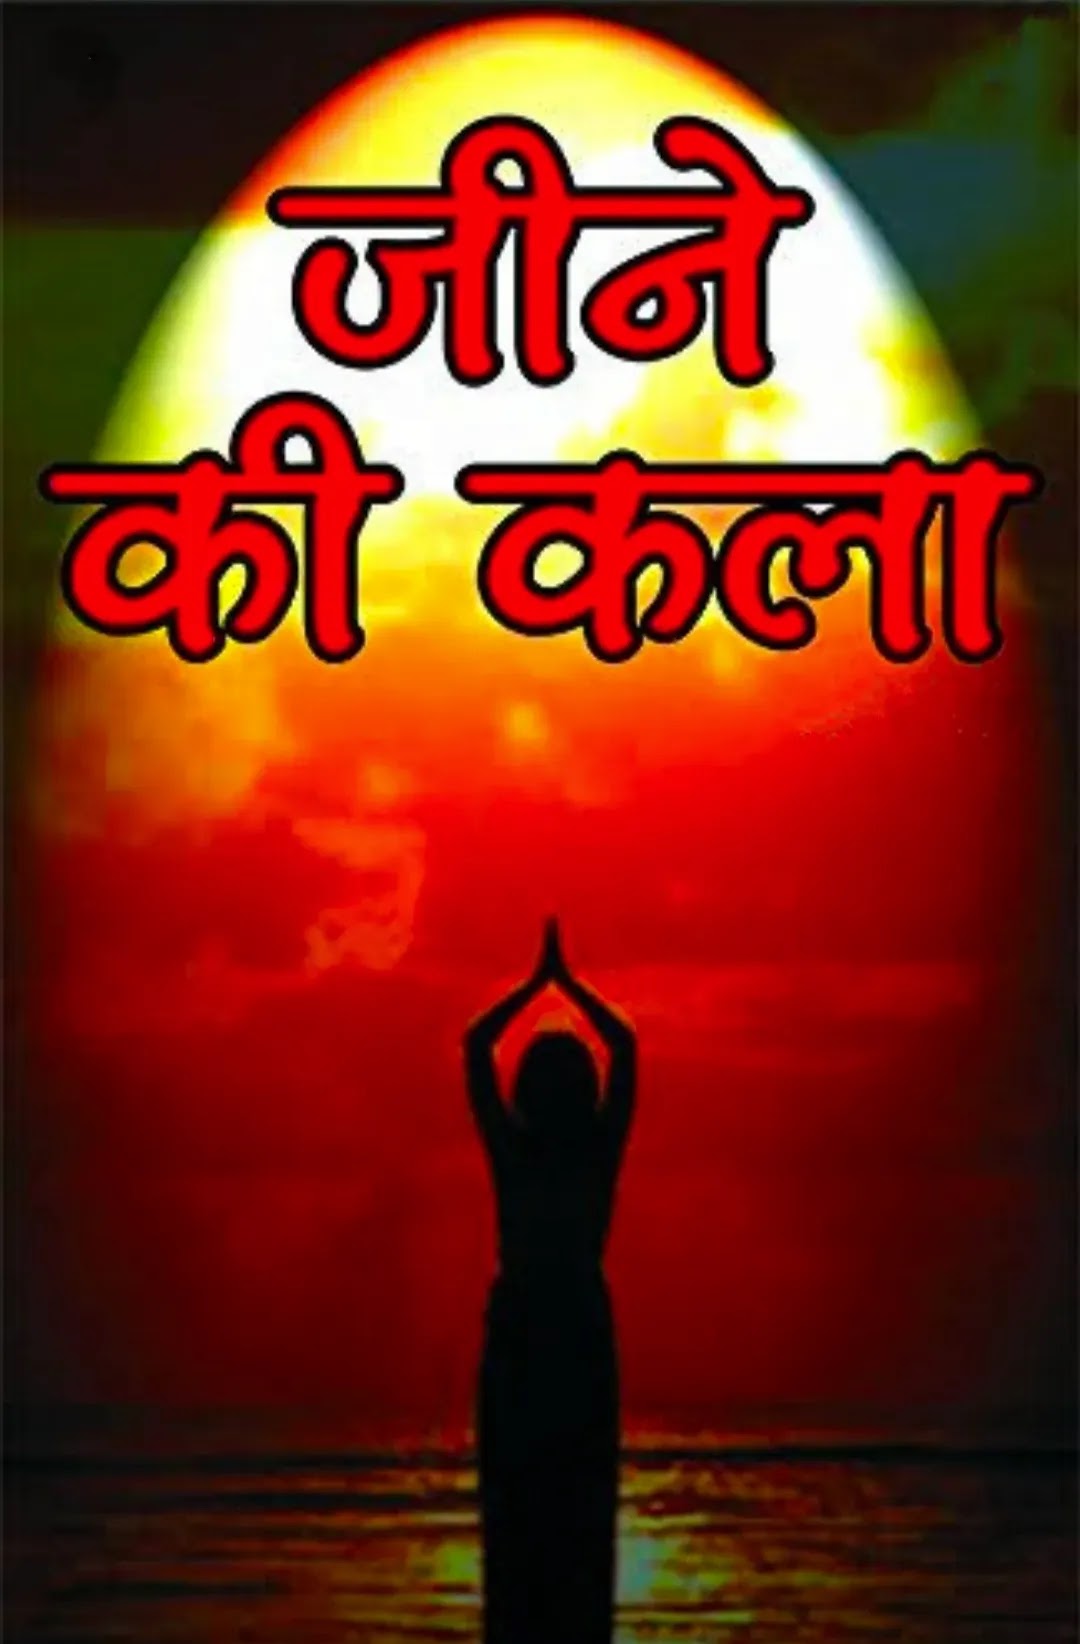 Art of living | Essential rule of human routine and health in Hindi .